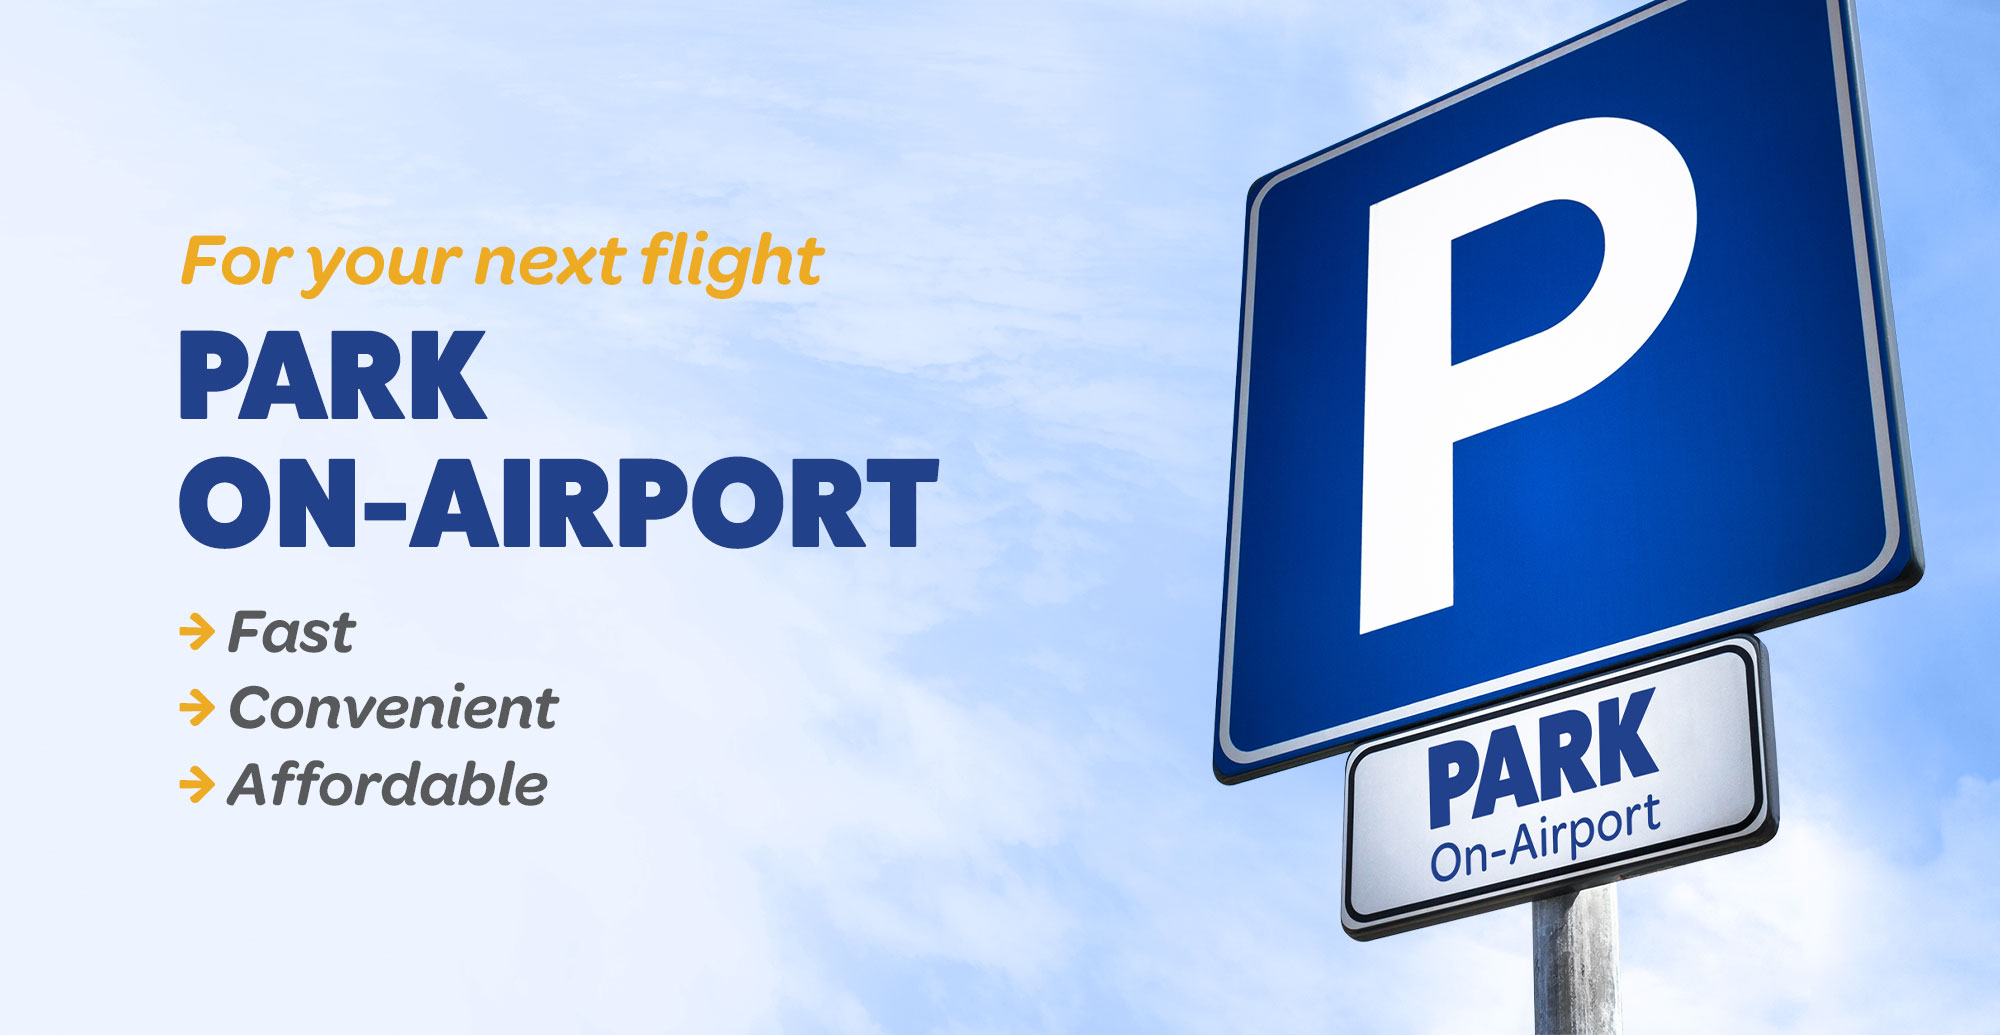 For your next flight, park on-airport.